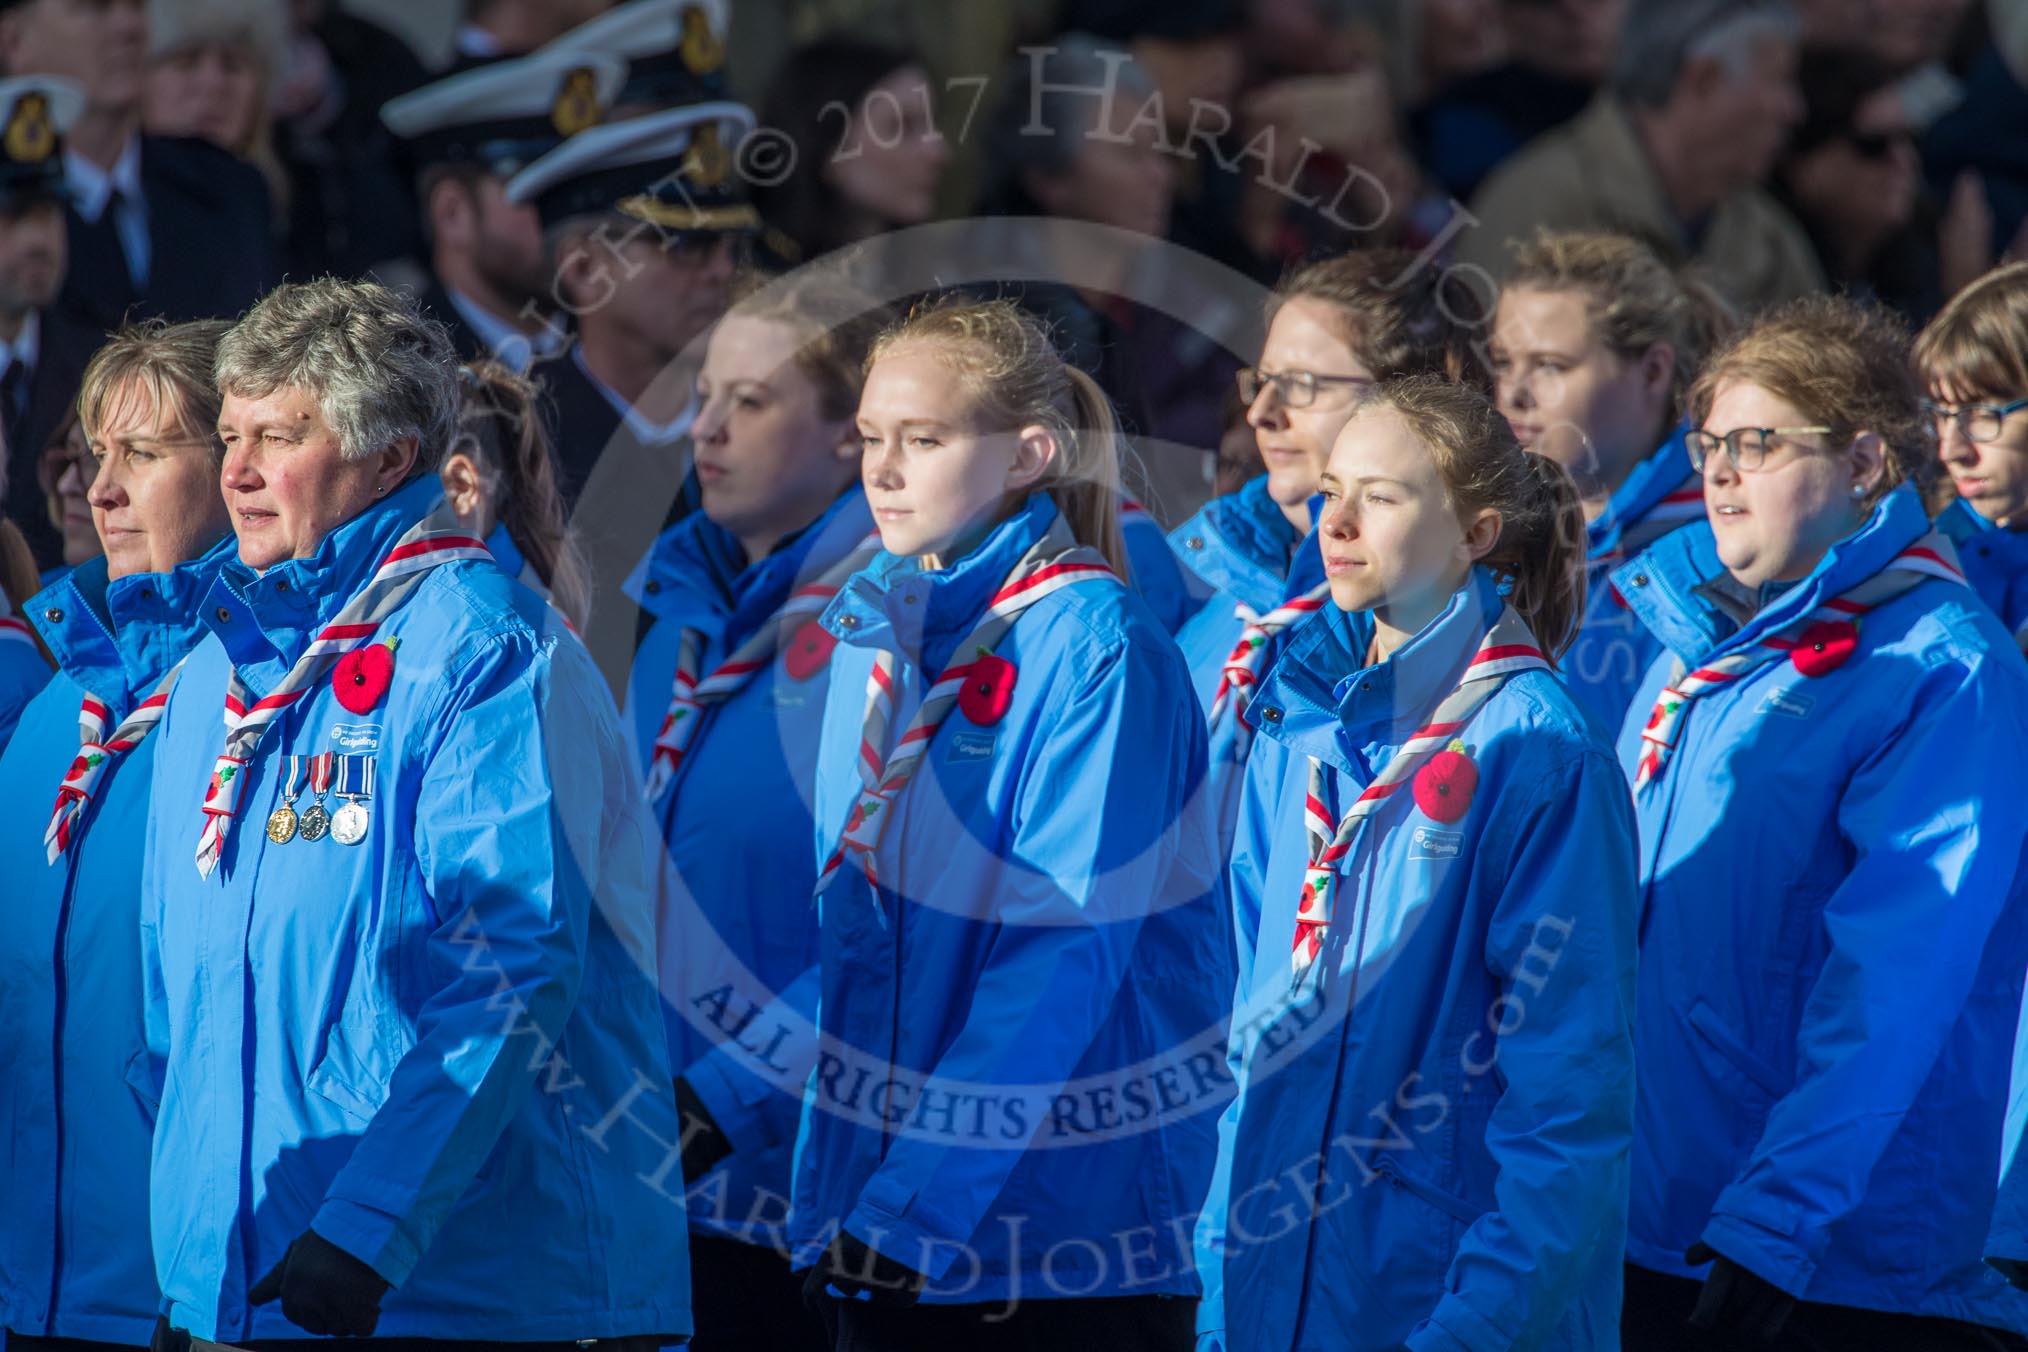 Girlguiding London and South East England(Group M38, 40 members) during the Royal British Legion March Past on Remembrance Sunday at the Cenotaph, Whitehall, Westminster, London, 11 November 2018, 12:30.